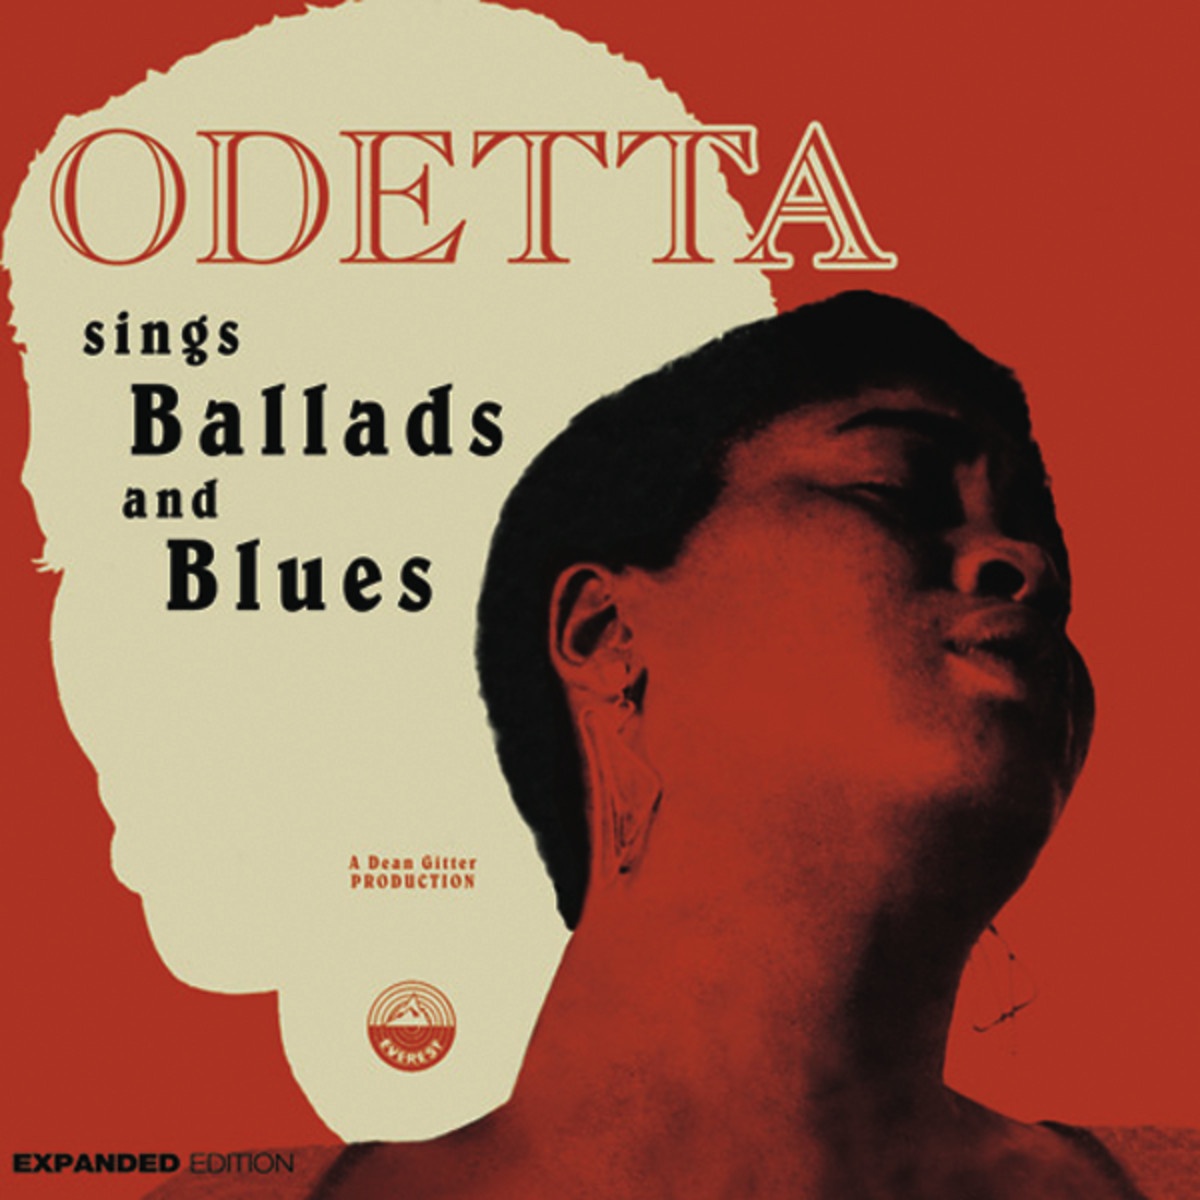 Odetta Sings Ballads and Blues